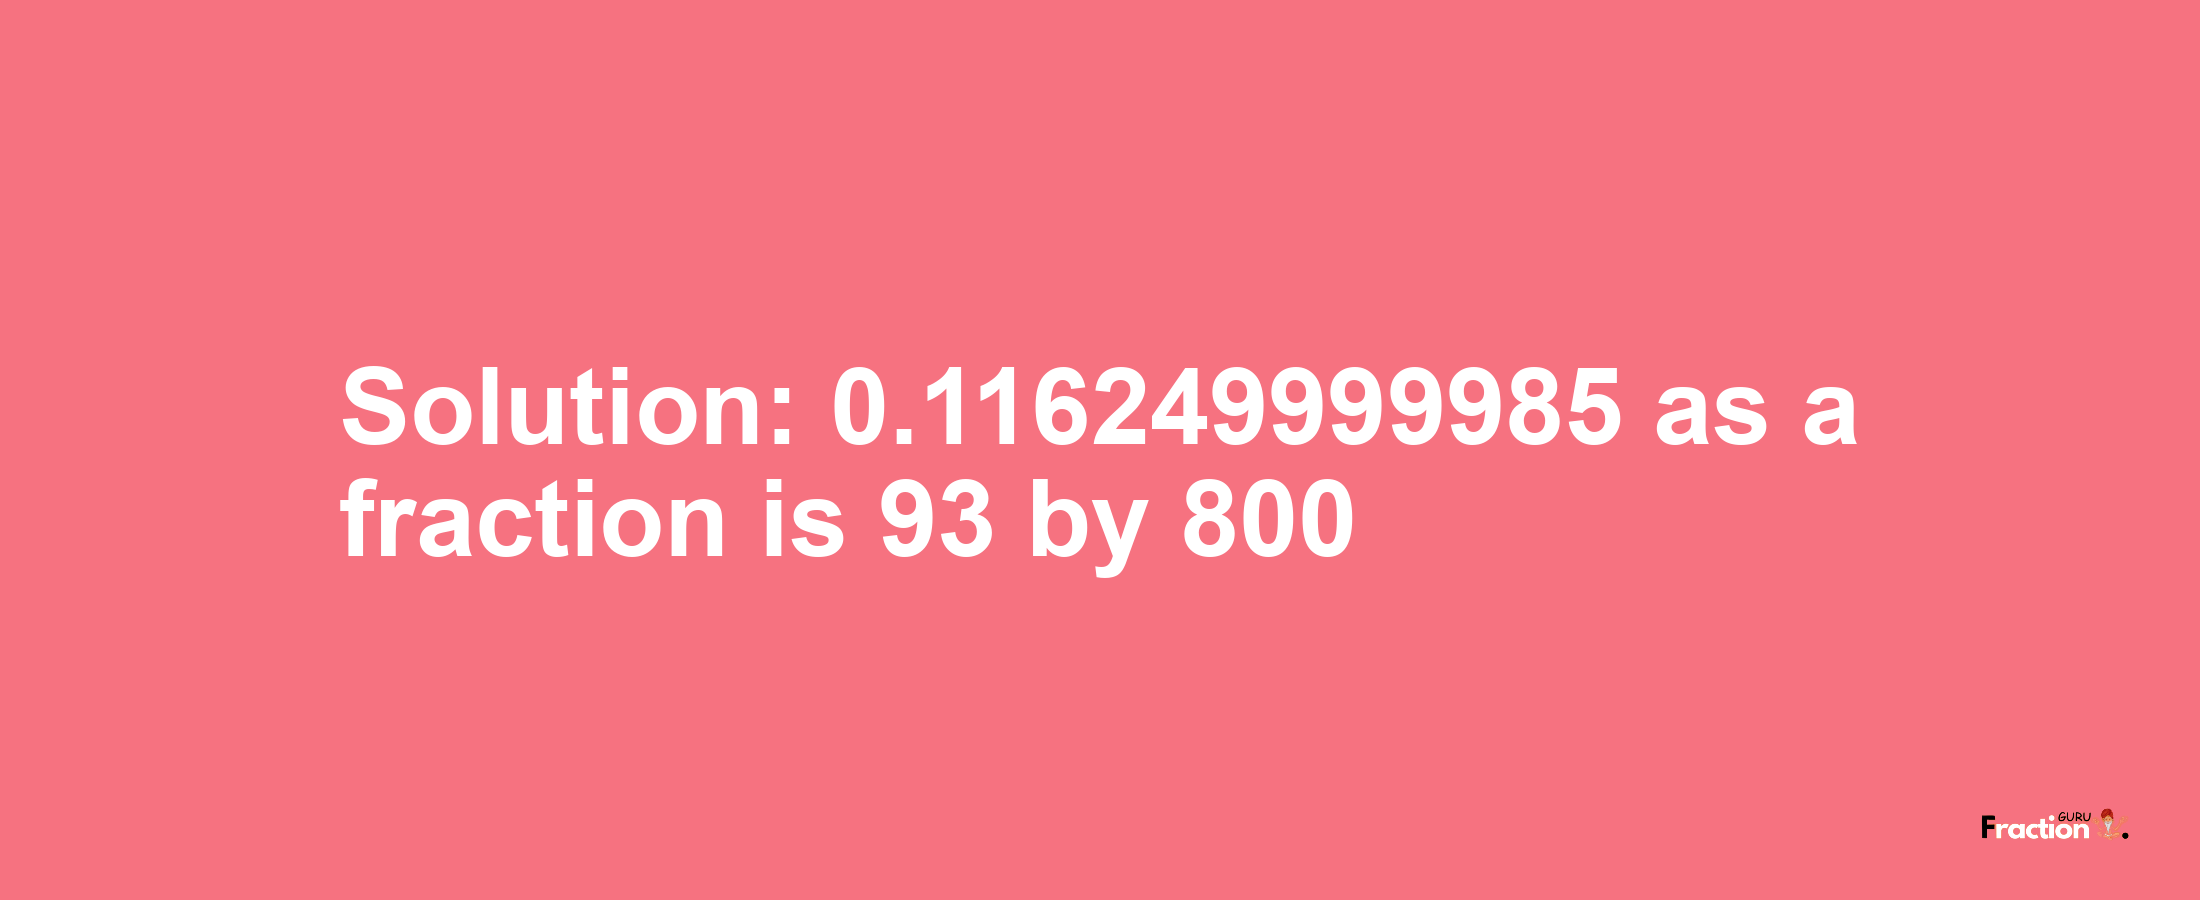 Solution:0.116249999985 as a fraction is 93/800